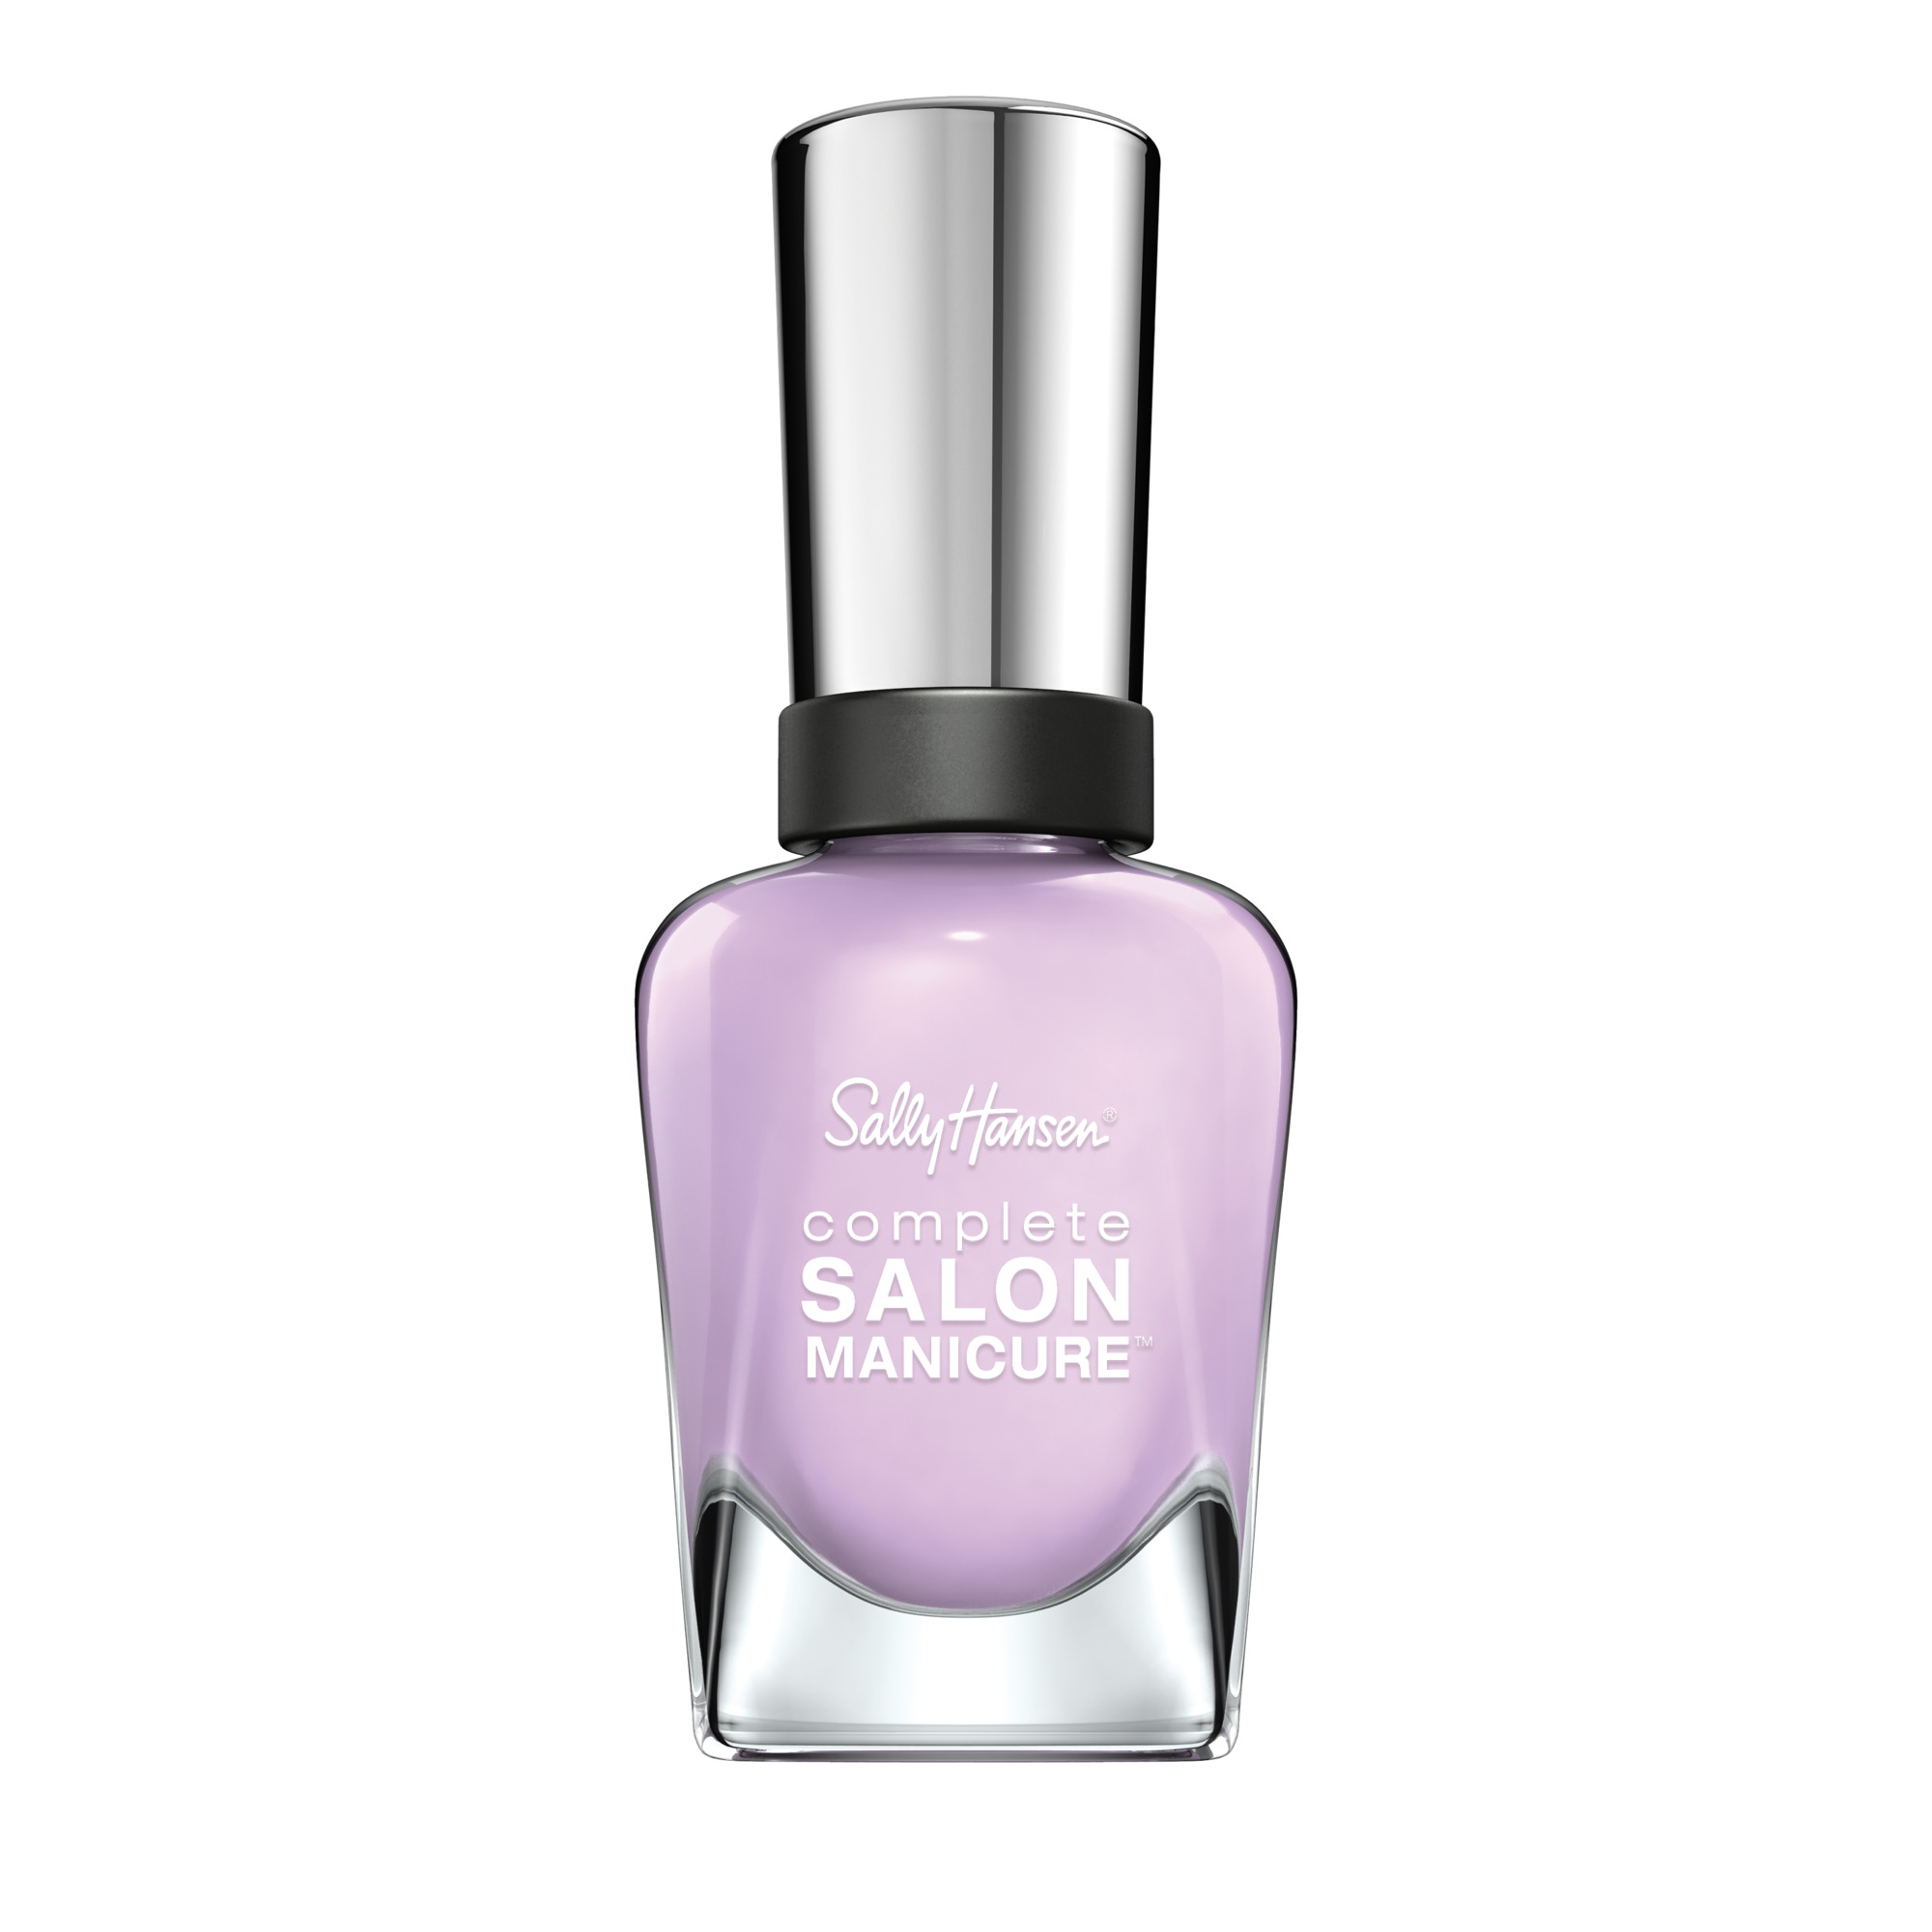 Sally Hansen Complete Salon Manicure Nail Color, What in Carnation? - image 1 of 4